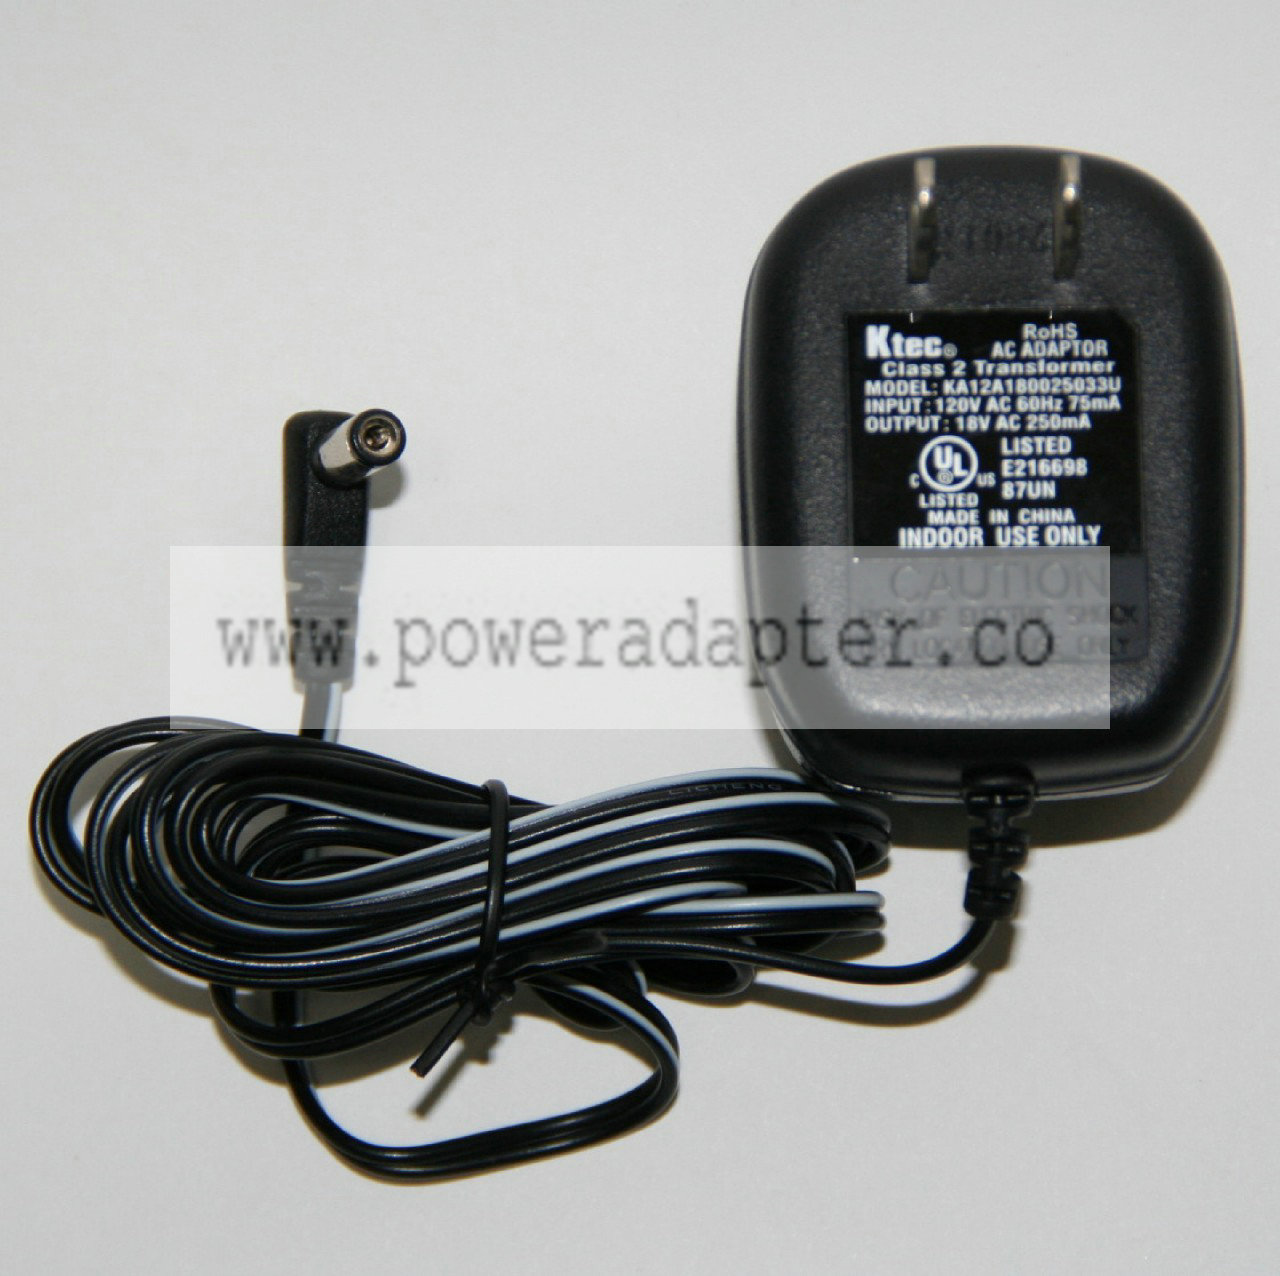 ART C127 18V 250mA Center Negative Power Supply Product Description This product is an ART brand power supply that is